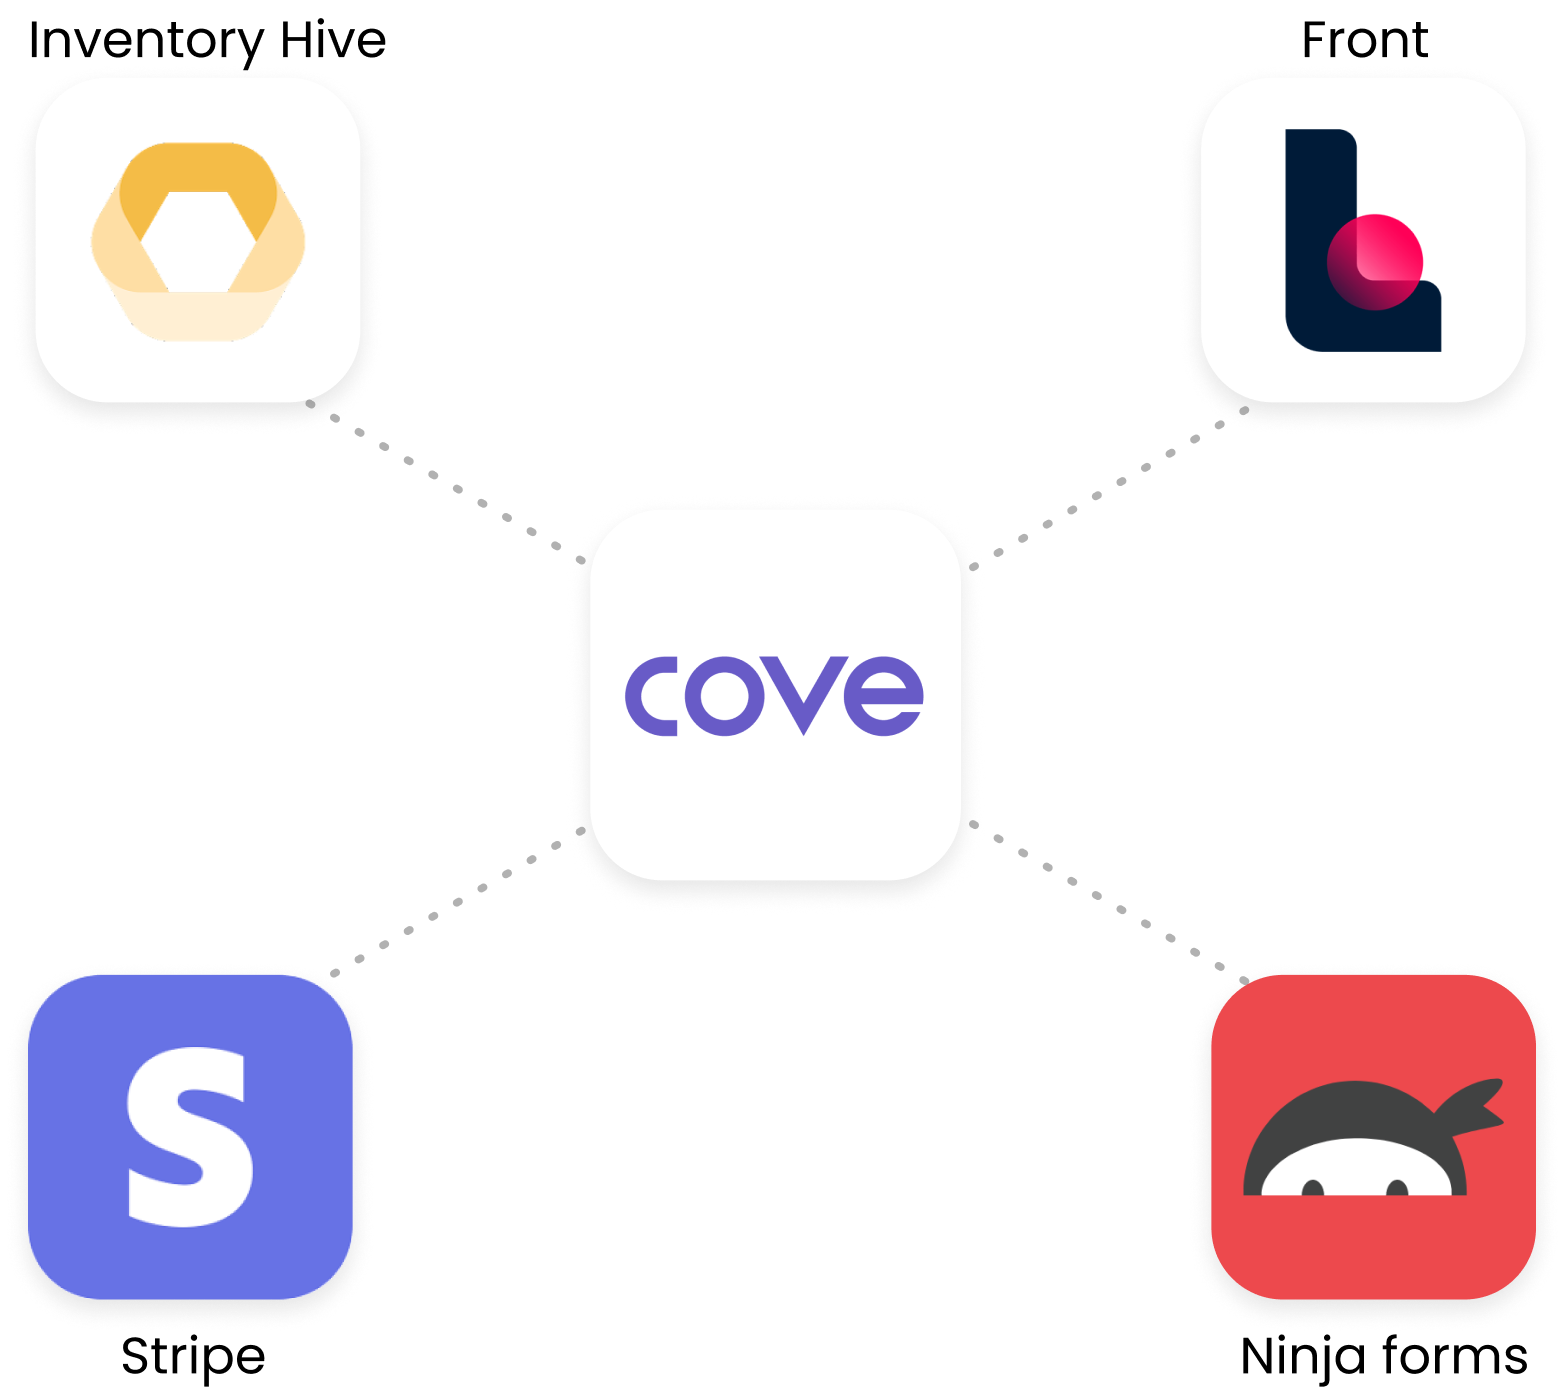 How we solved Cove's problem of plugging in different tools to our Property Management Software